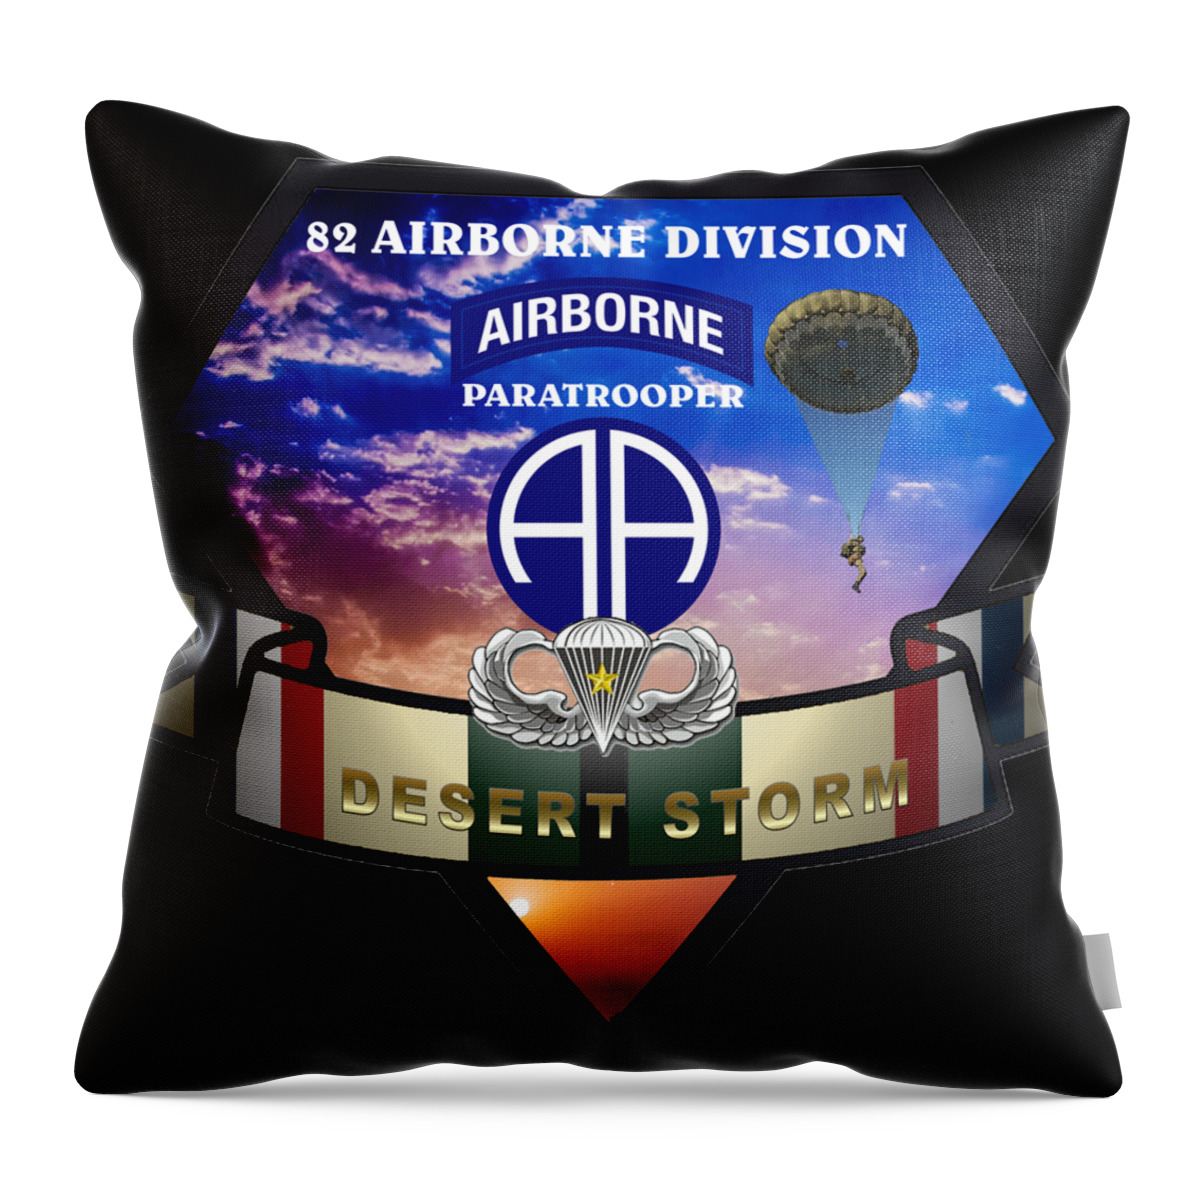 82nd Throw Pillow featuring the digital art 82 Airborne Division by Bill Richards